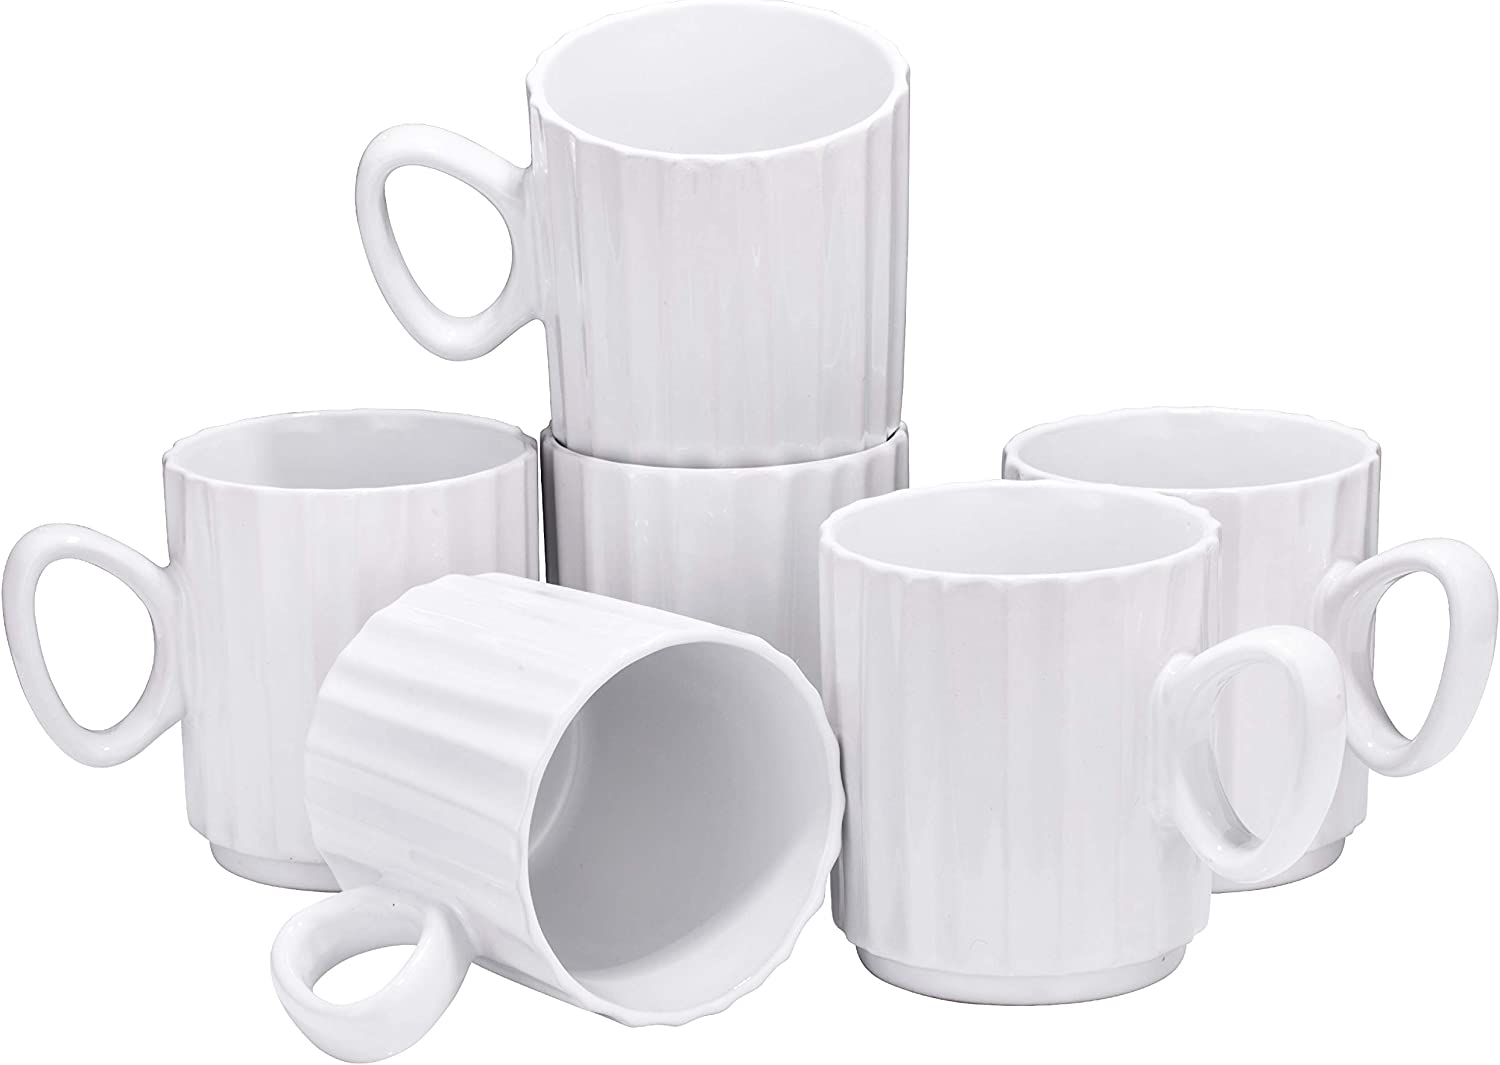 Cappuccino Cups with Saucers by Bruntmor - 6 ounce - Set of 6 